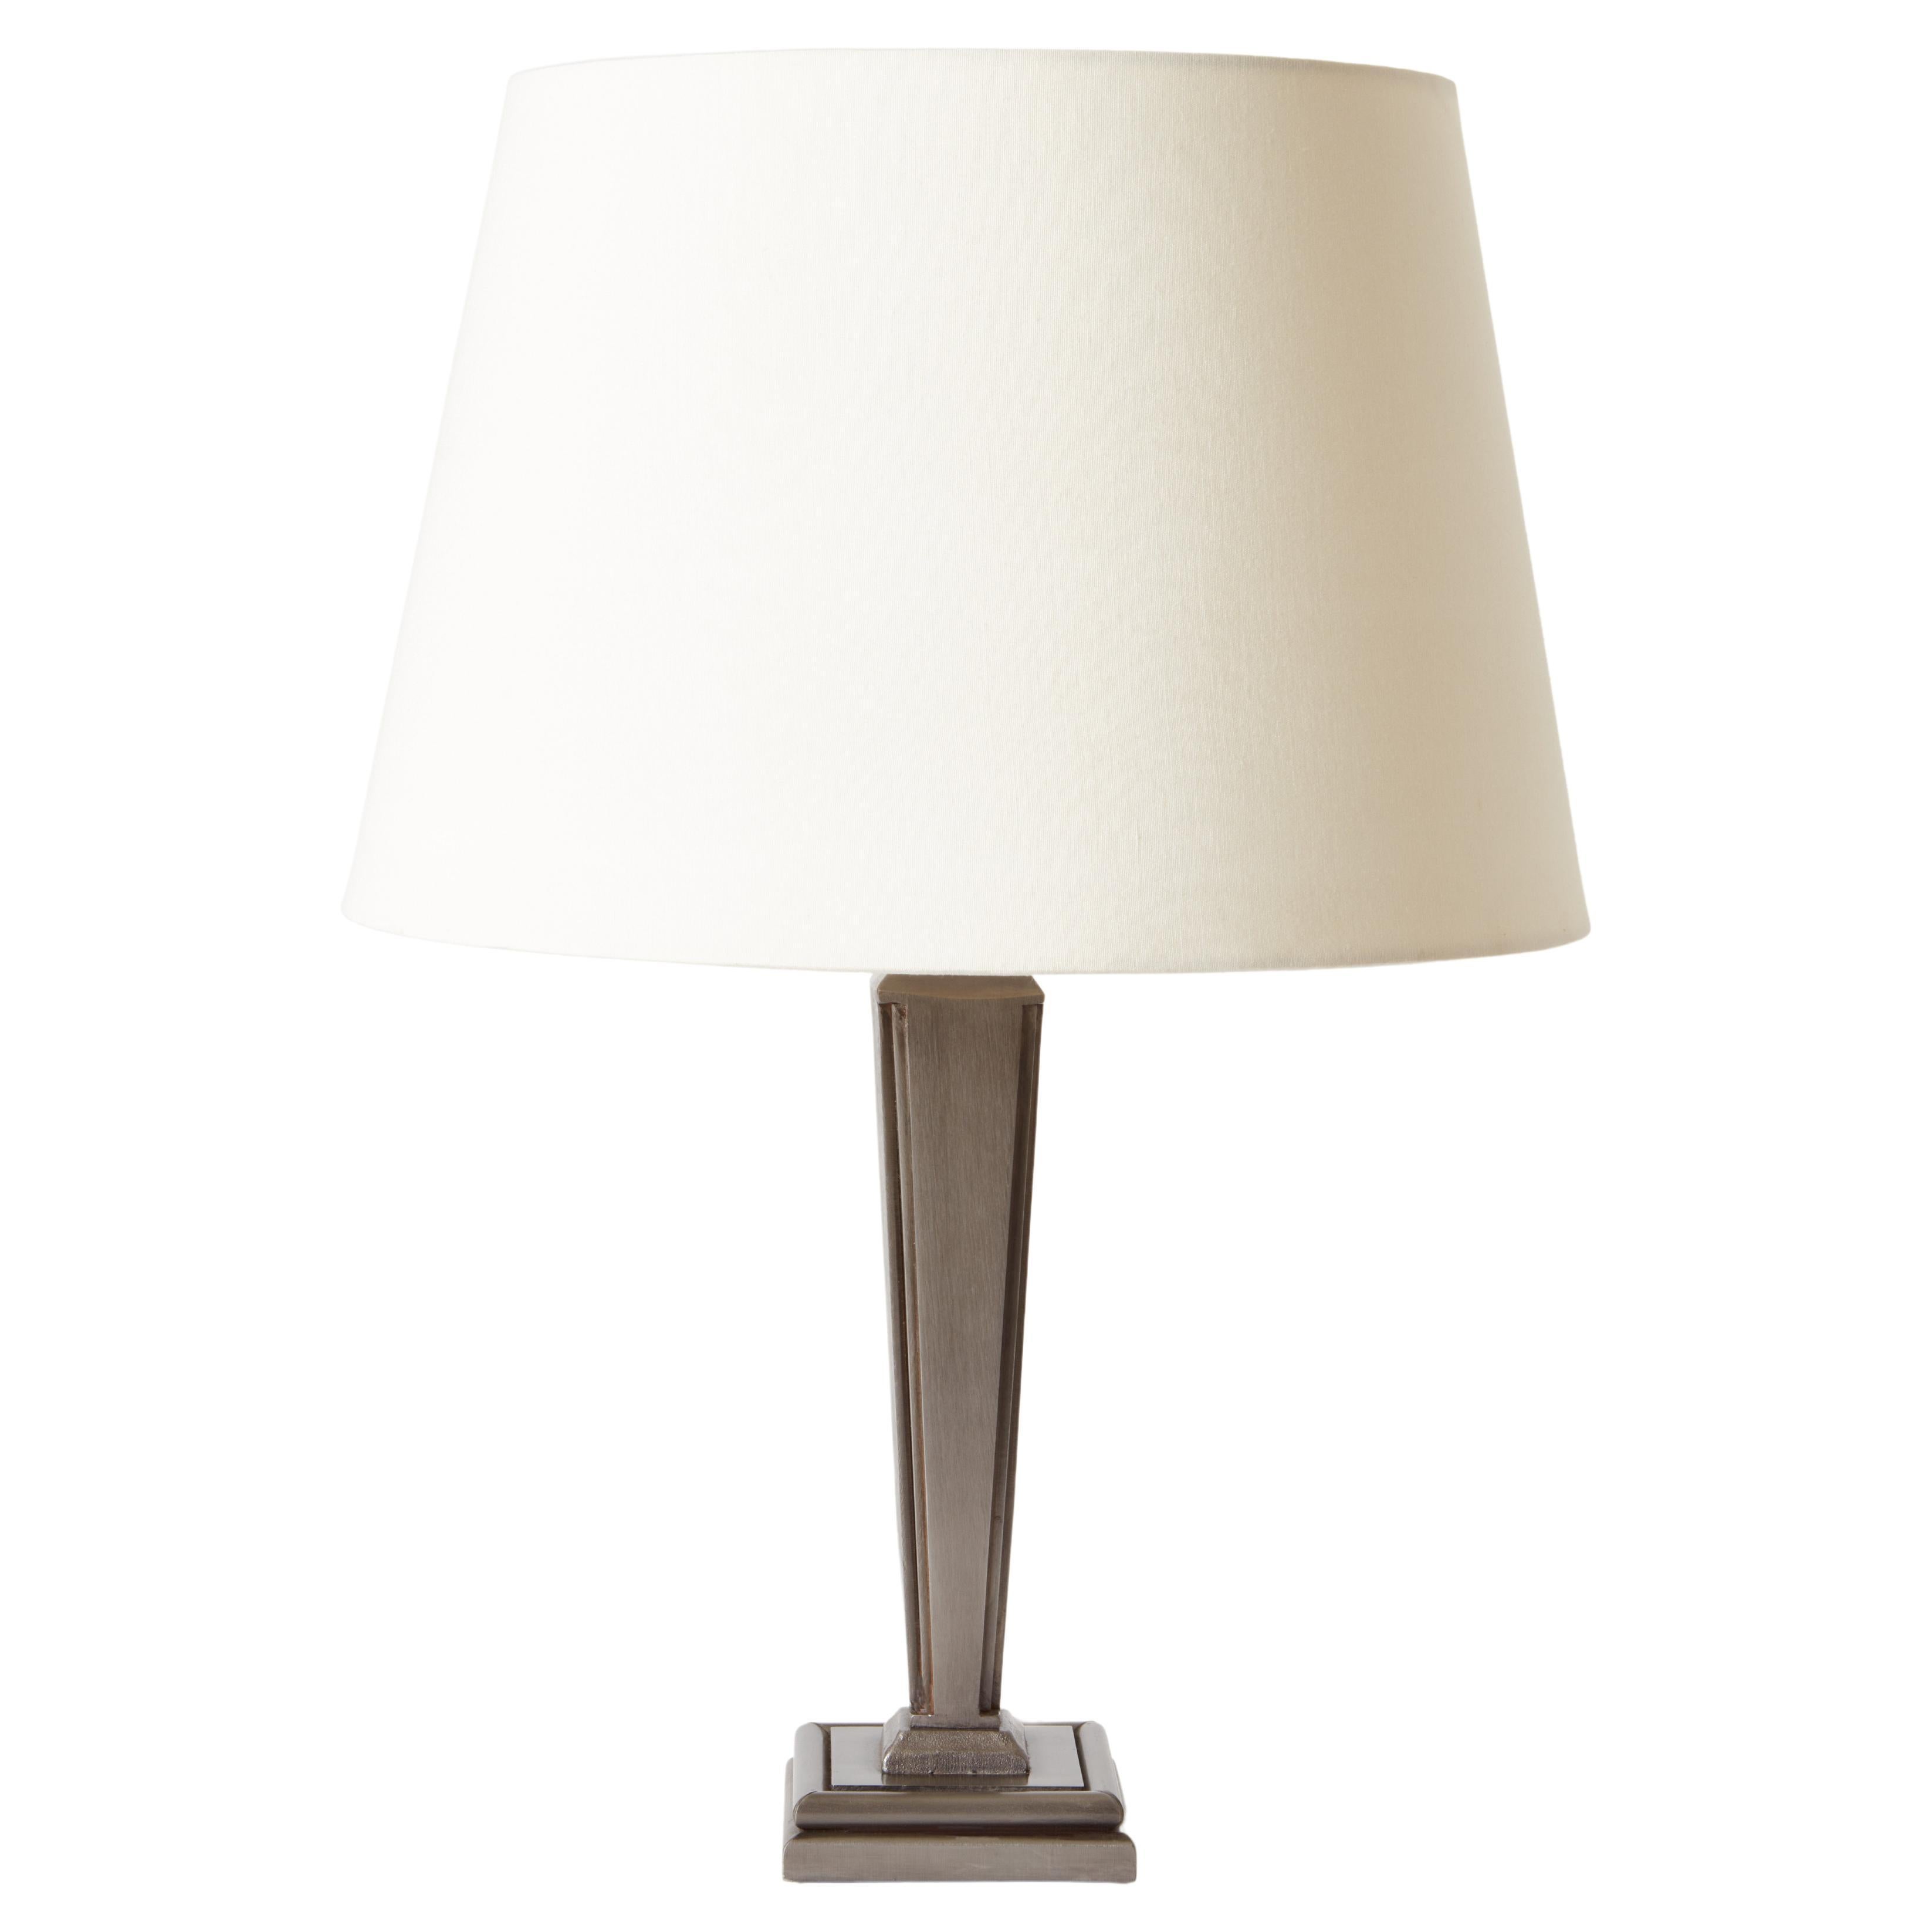 Contemporary Neoclassical 'Inverted' Table Lamp